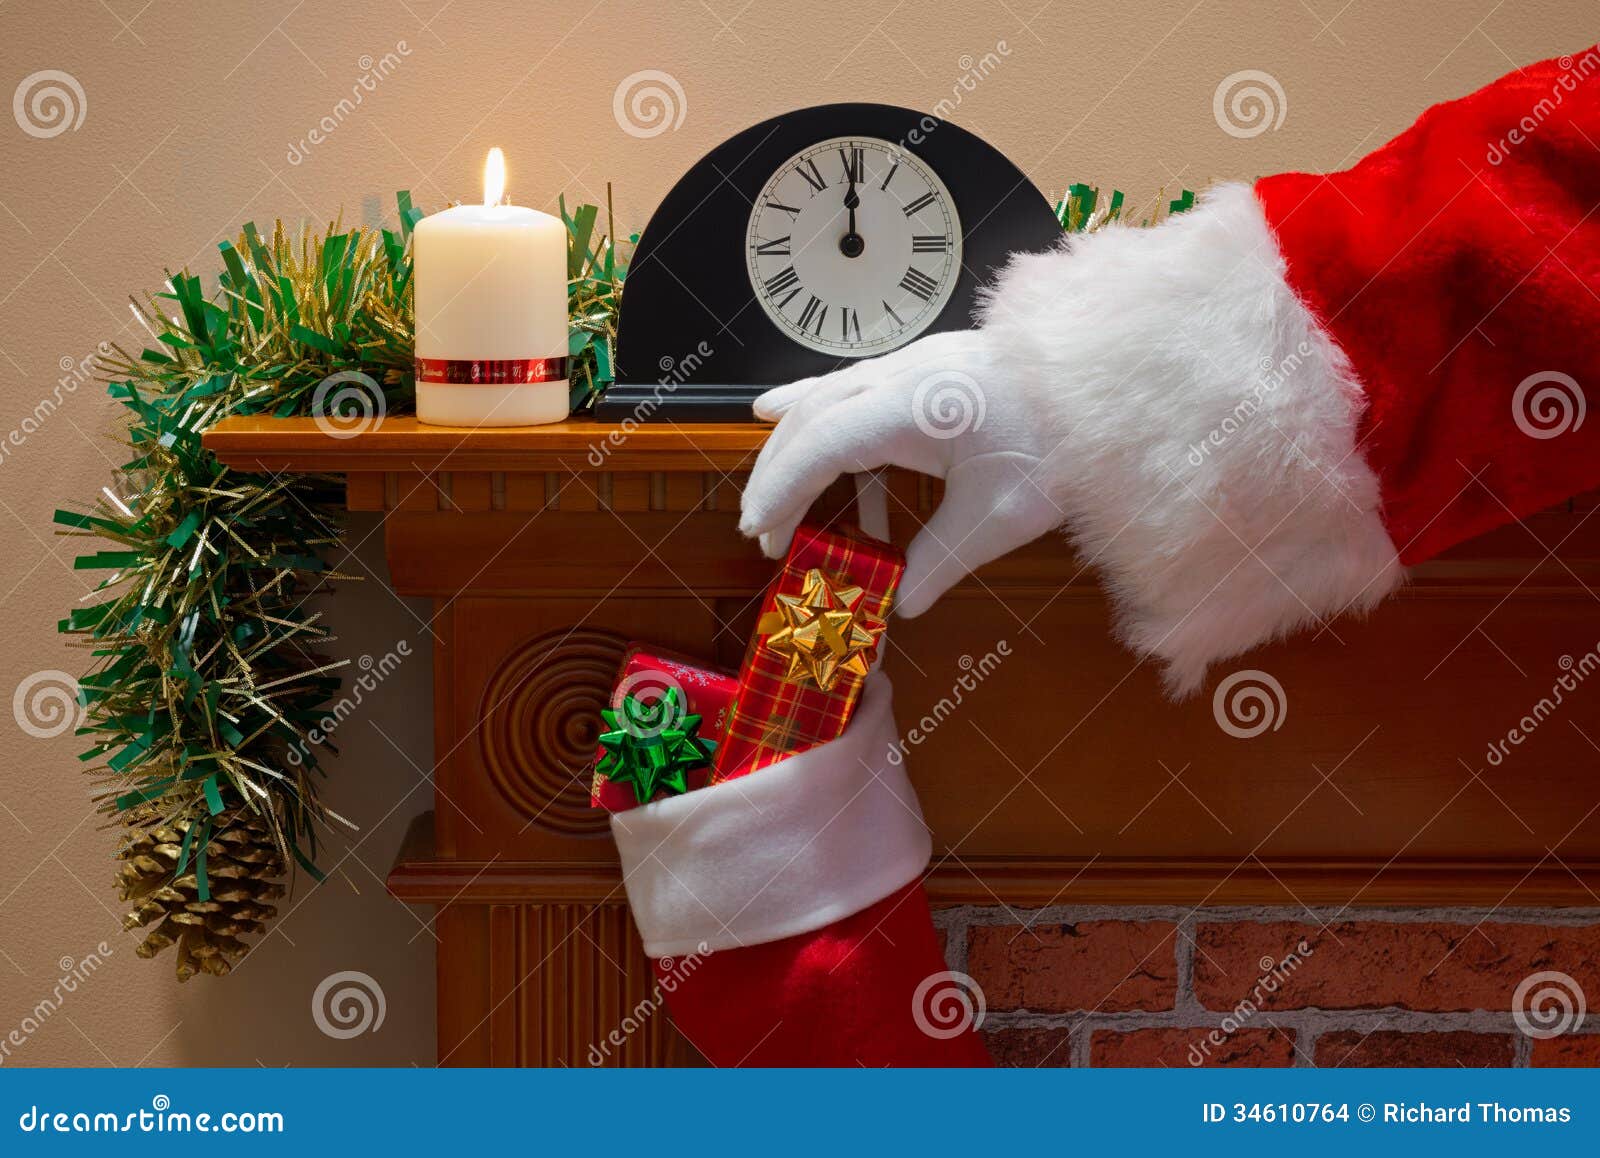 santa-claus-delivering-presents-on-christmas-eve-stock-images-image